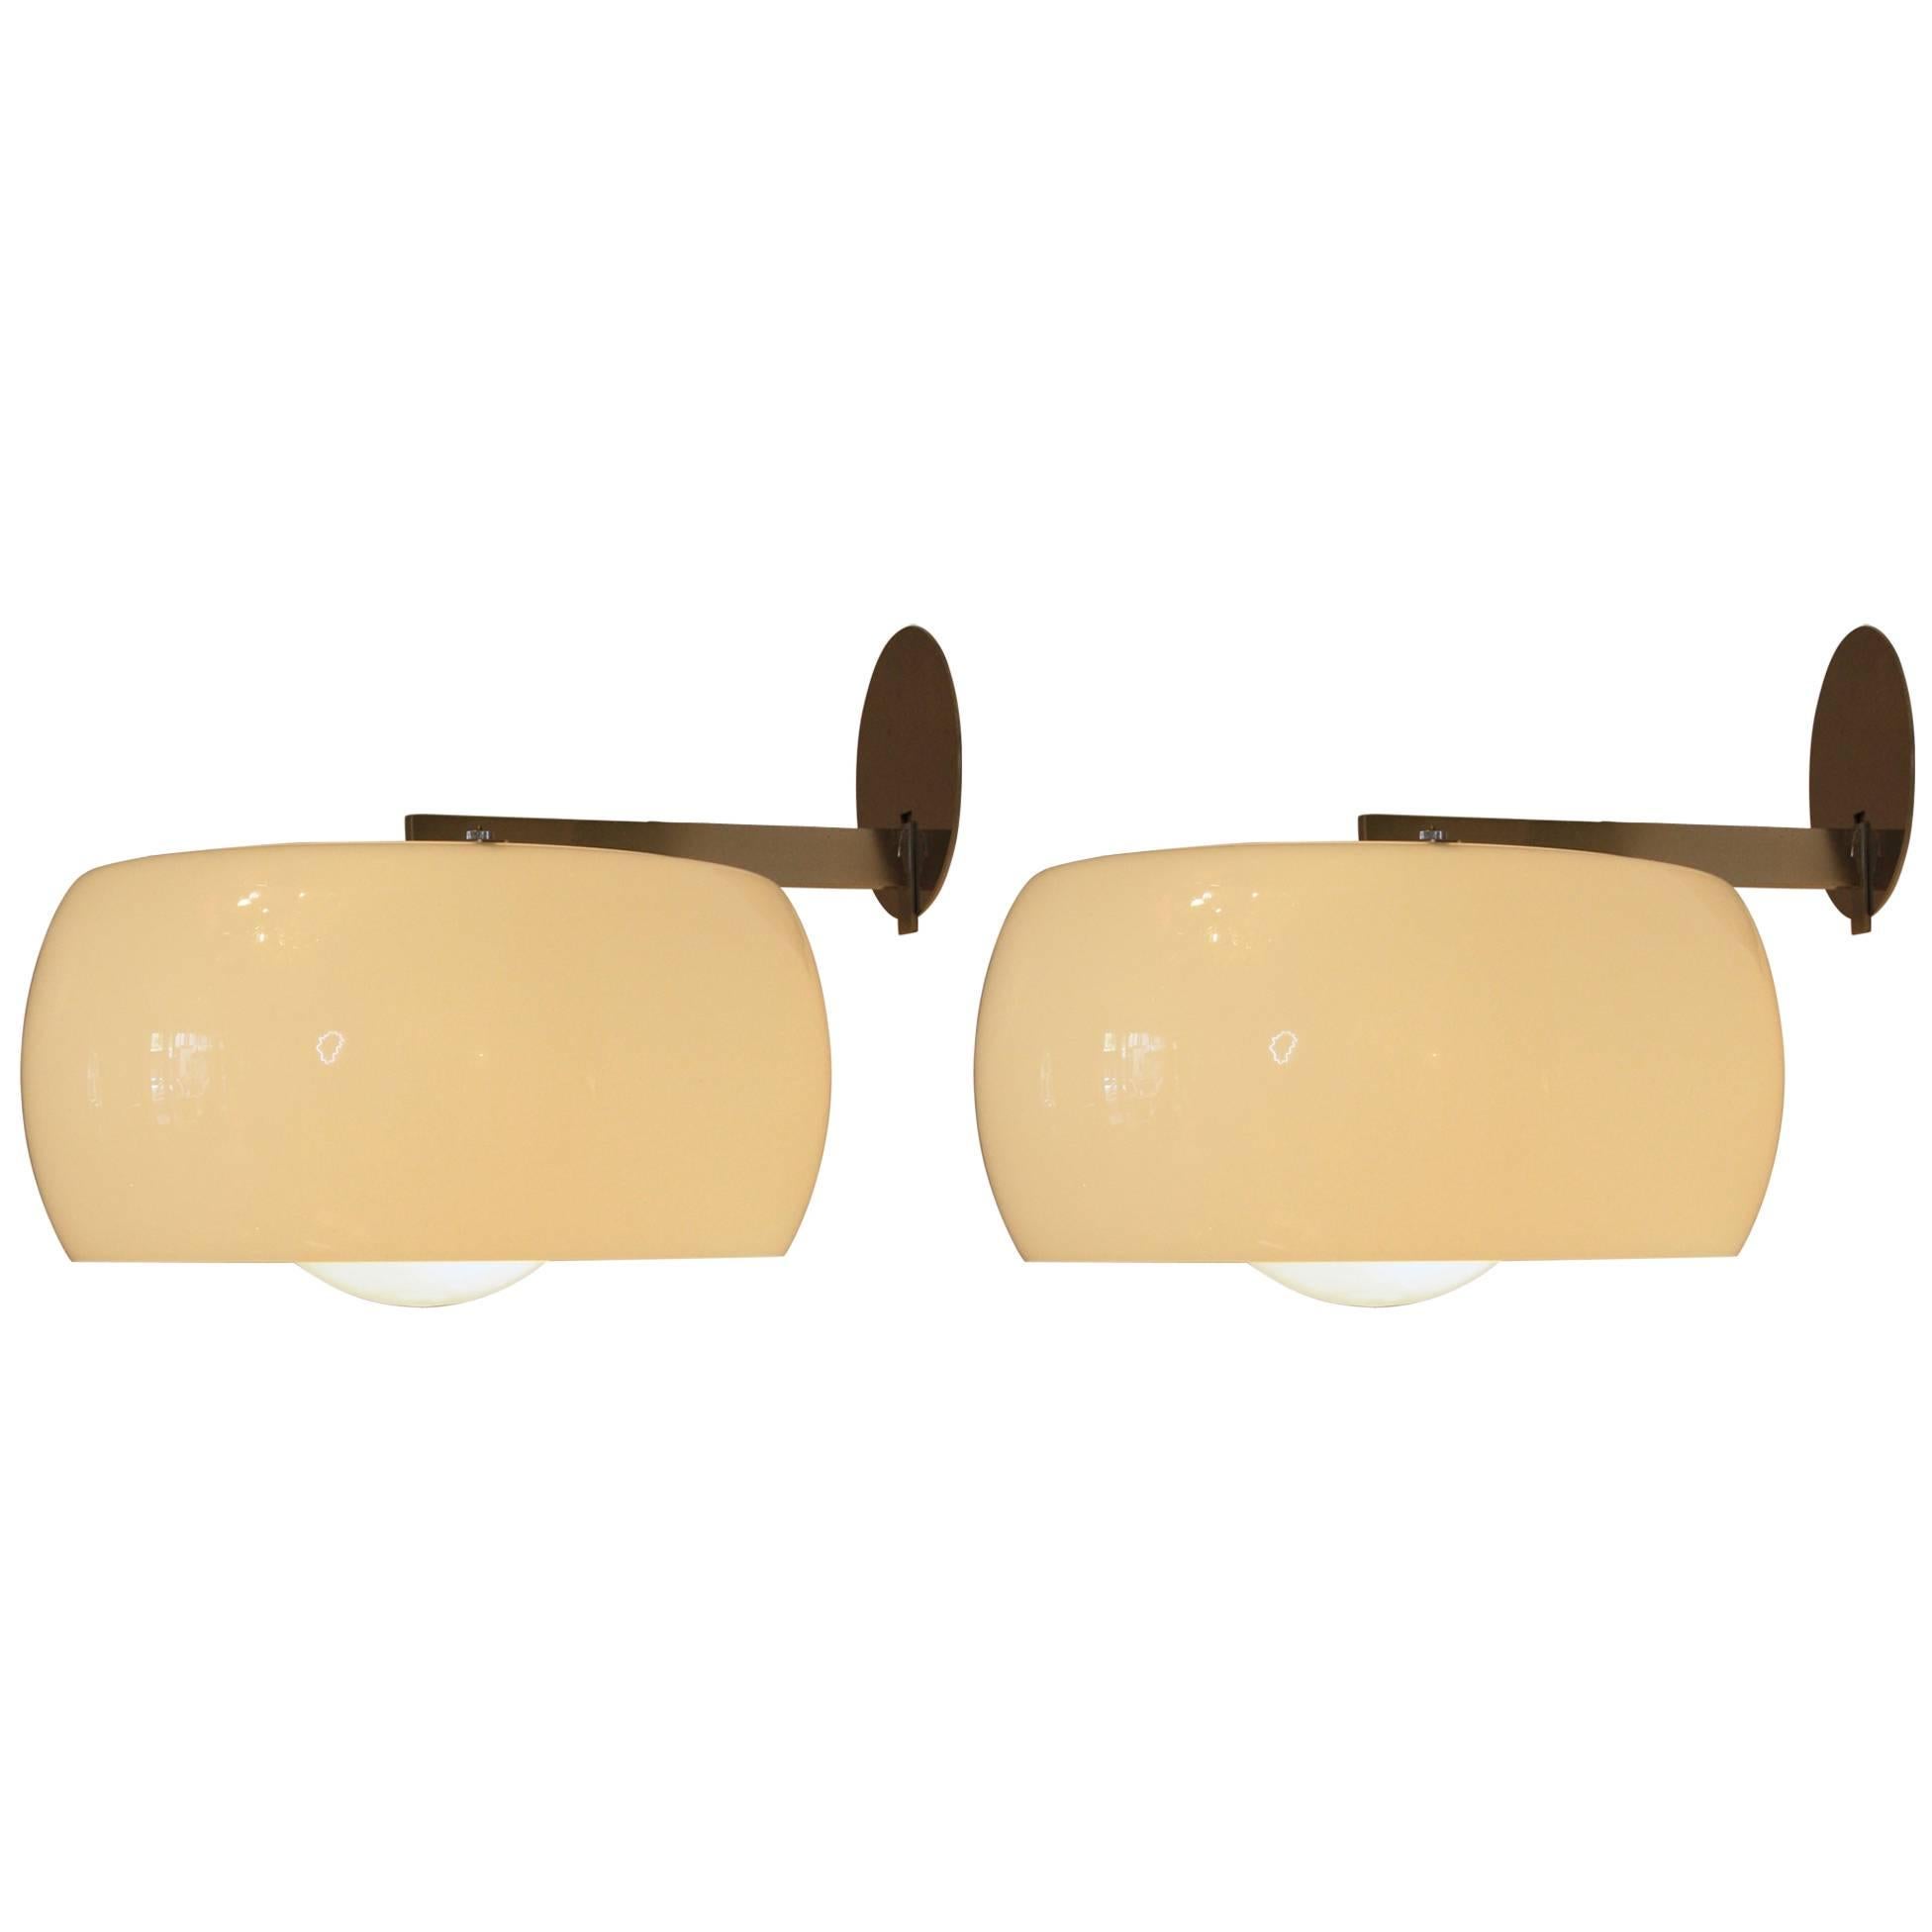 Pair of Wall Sconces by Vico Magistretti, 1960s For Sale